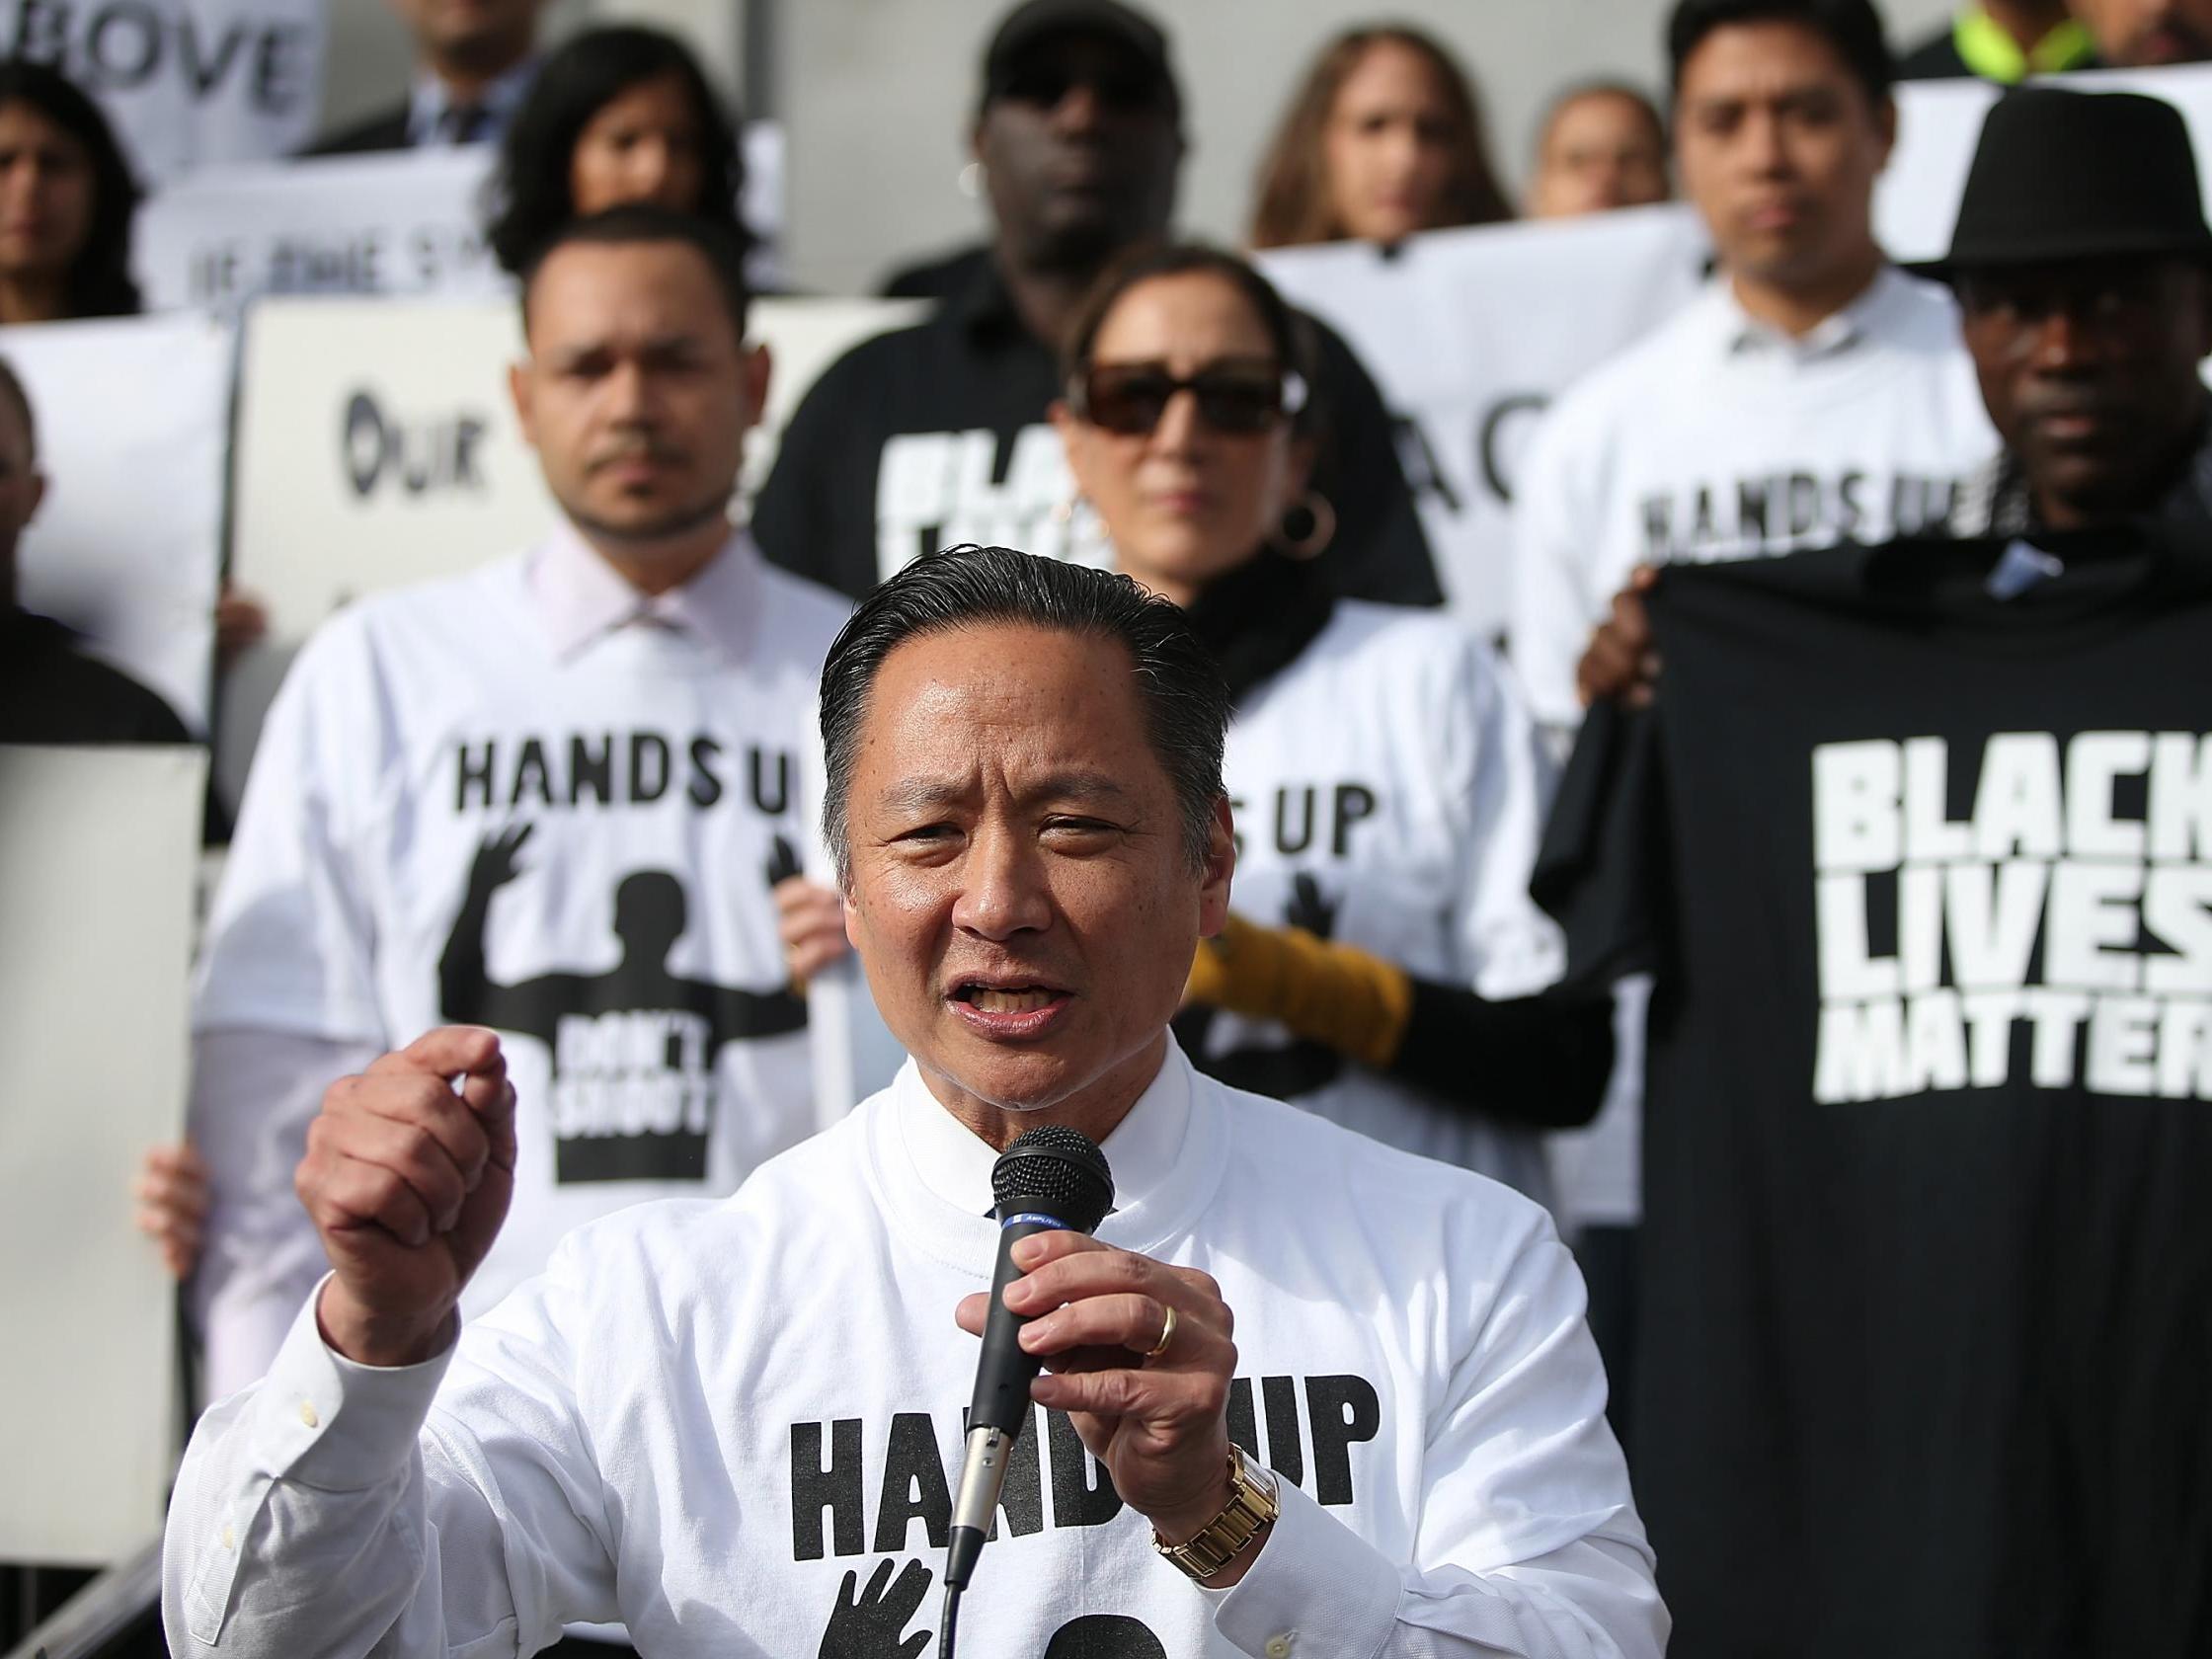 Leaked information about the death of public defender Jeff Adachi (above) has divided San Francisco